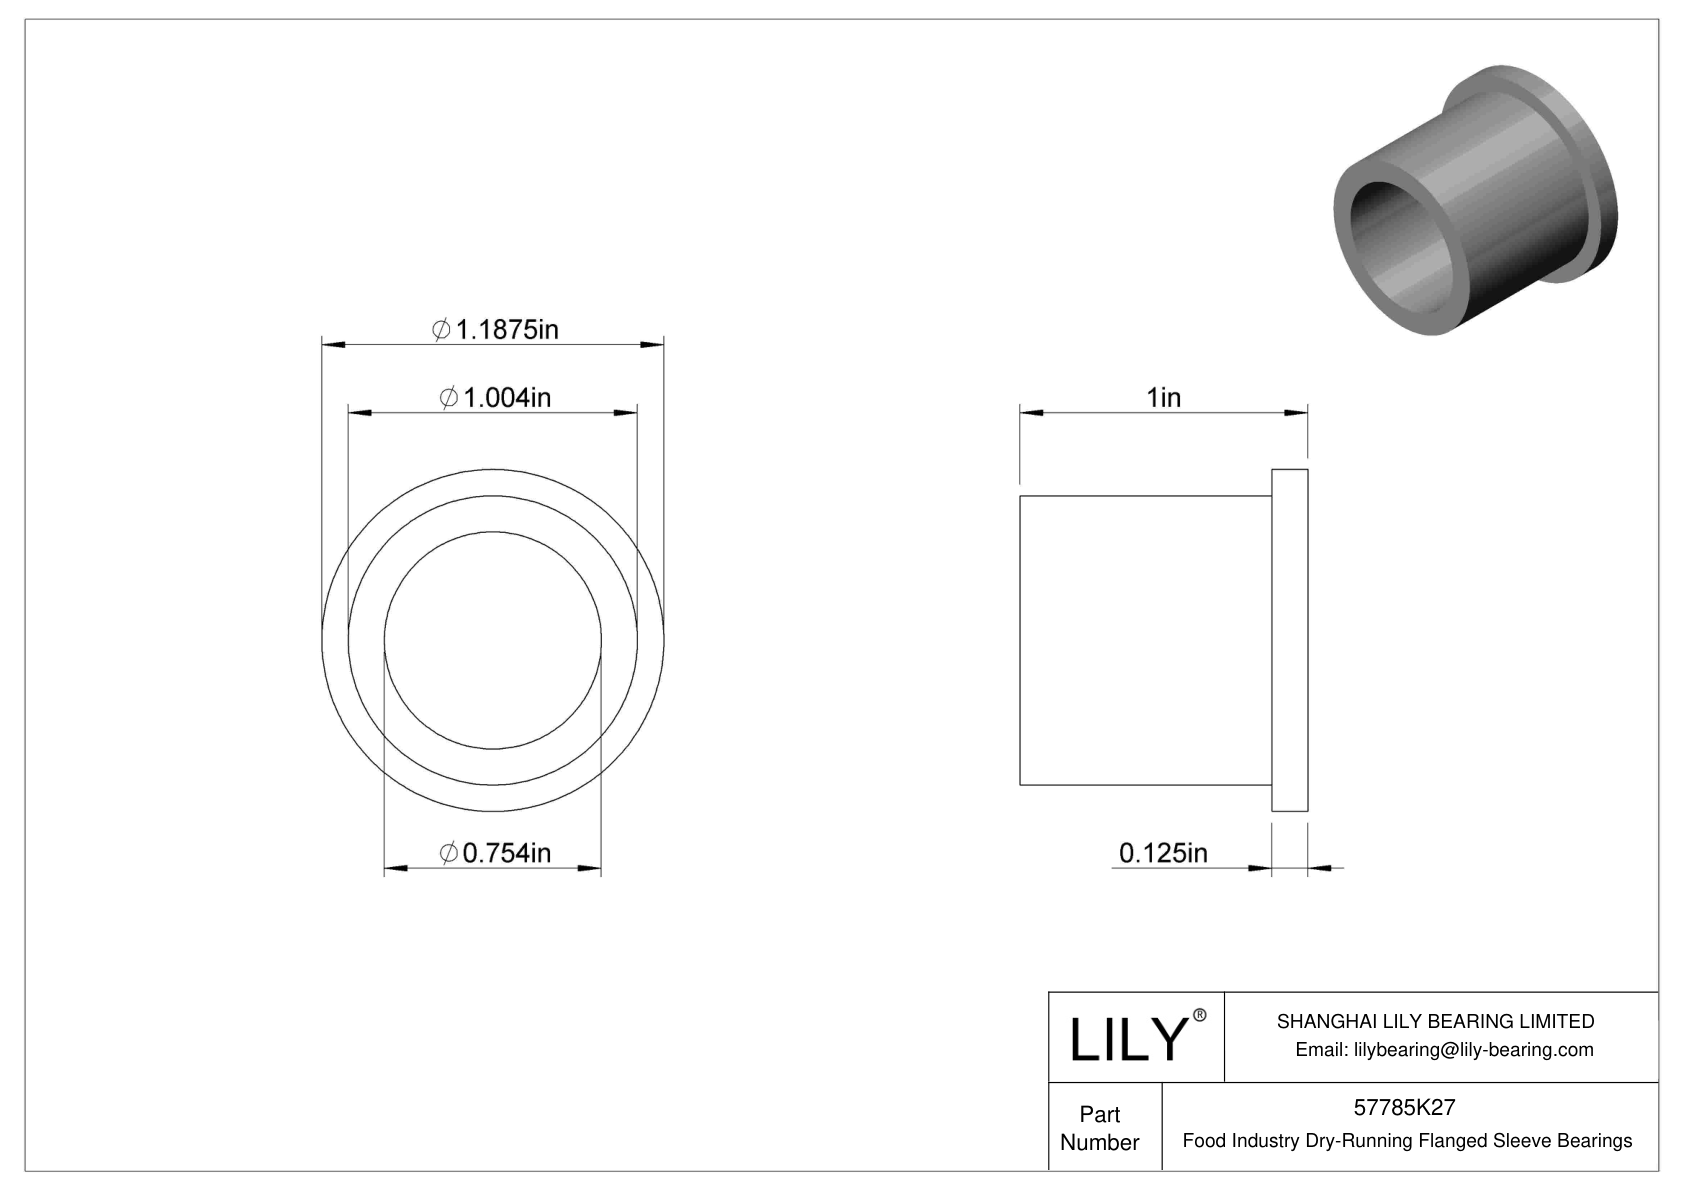 FHHIFKCH Food Industry Dry-Running Flanged Sleeve Bearings cad drawing